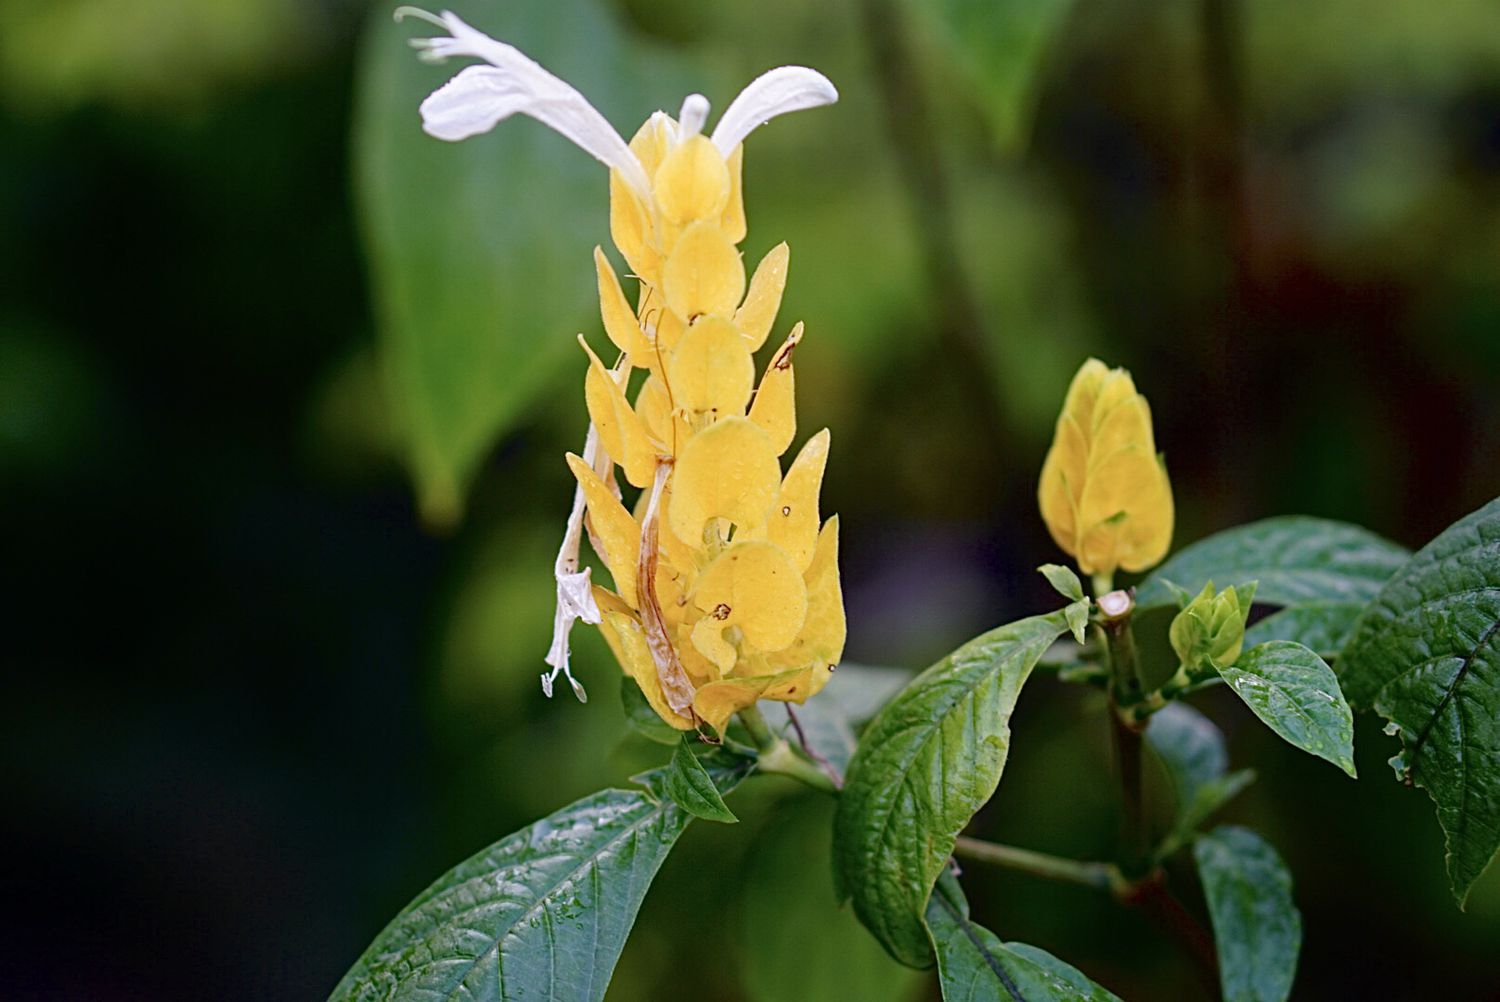 Golden shrimp plant with yellow layered stamen with three small white petals on top closeup